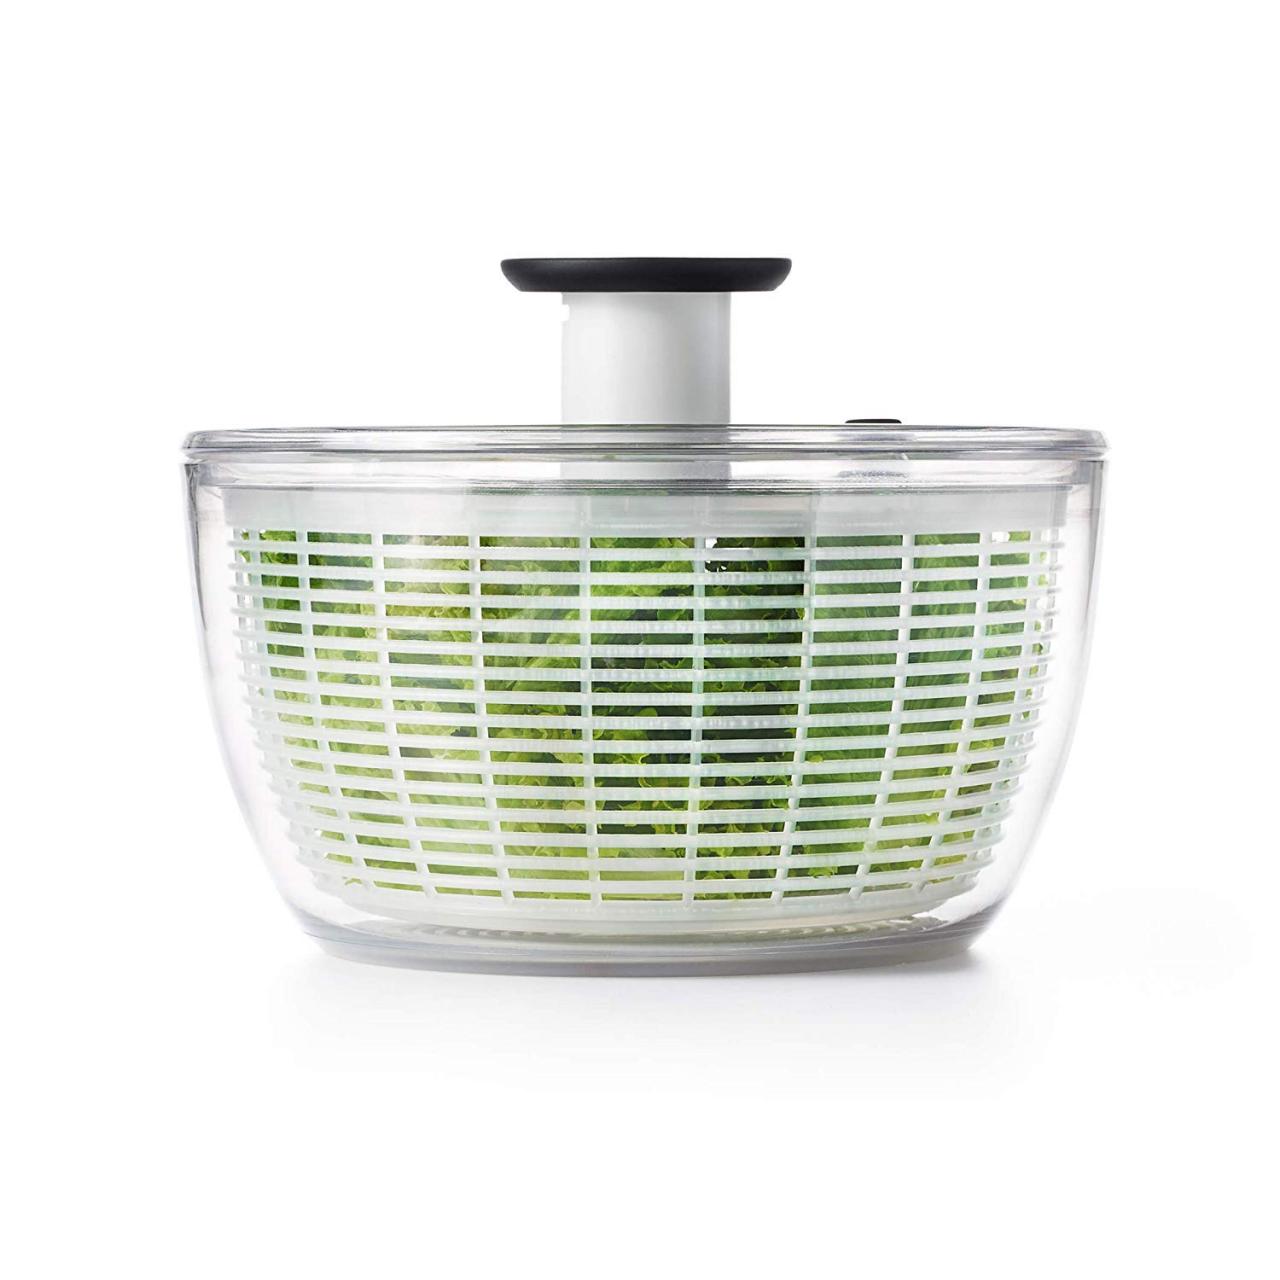 https://food.fnr.sndimg.com/content/dam/images/food/products/2019/7/12/rx_oxo-good-grips-5-quart-salad-spinner.jpeg.rend.hgtvcom.1280.1280.suffix/1562947300218.jpeg